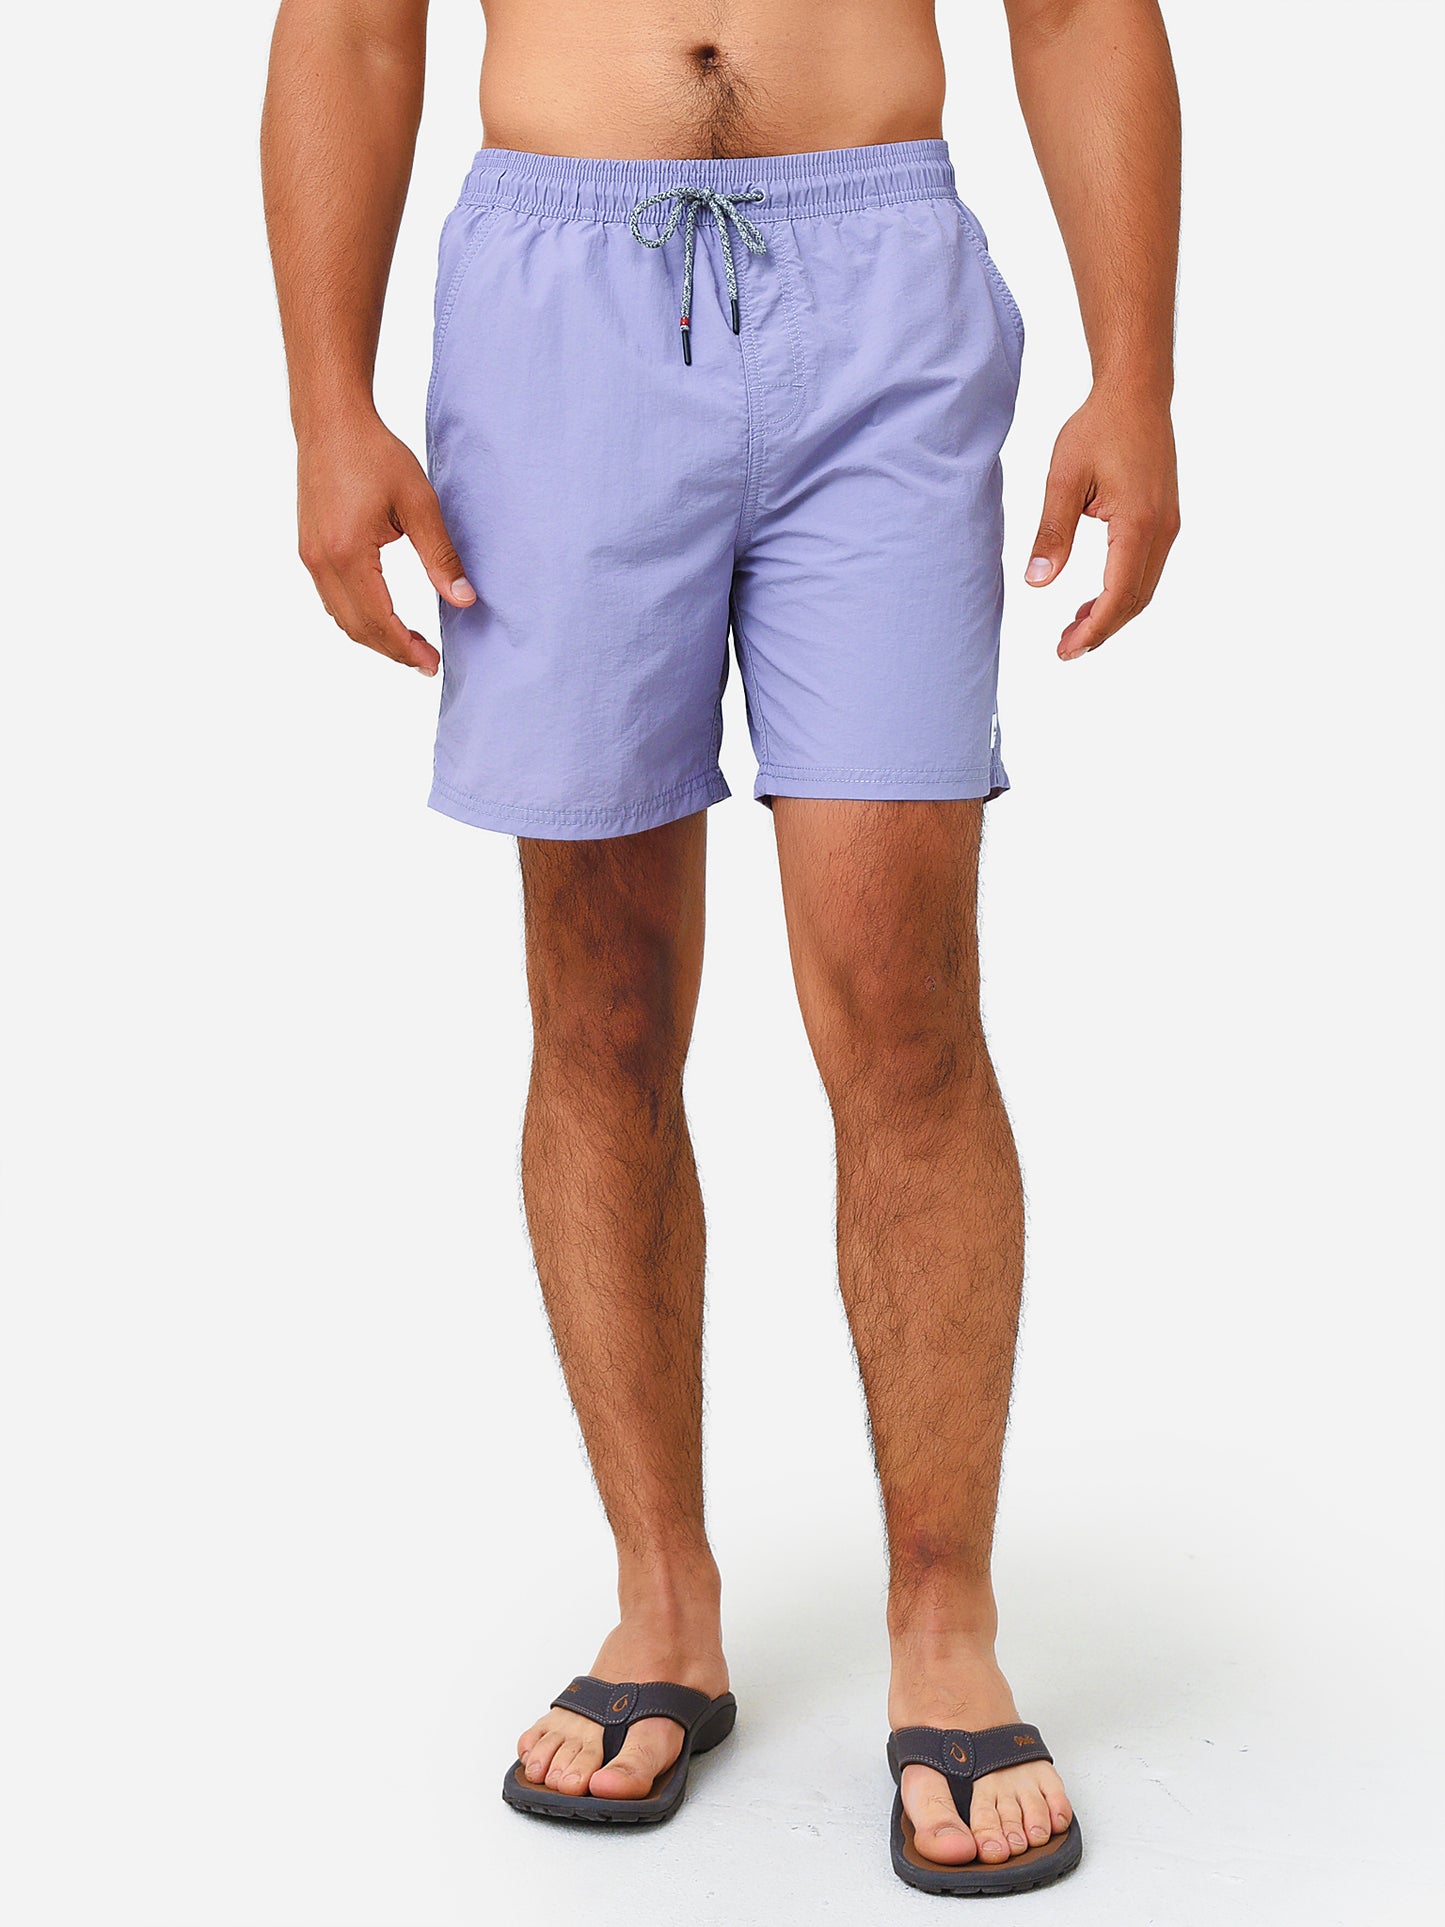 Katin Men's Poolside Volley Trunk